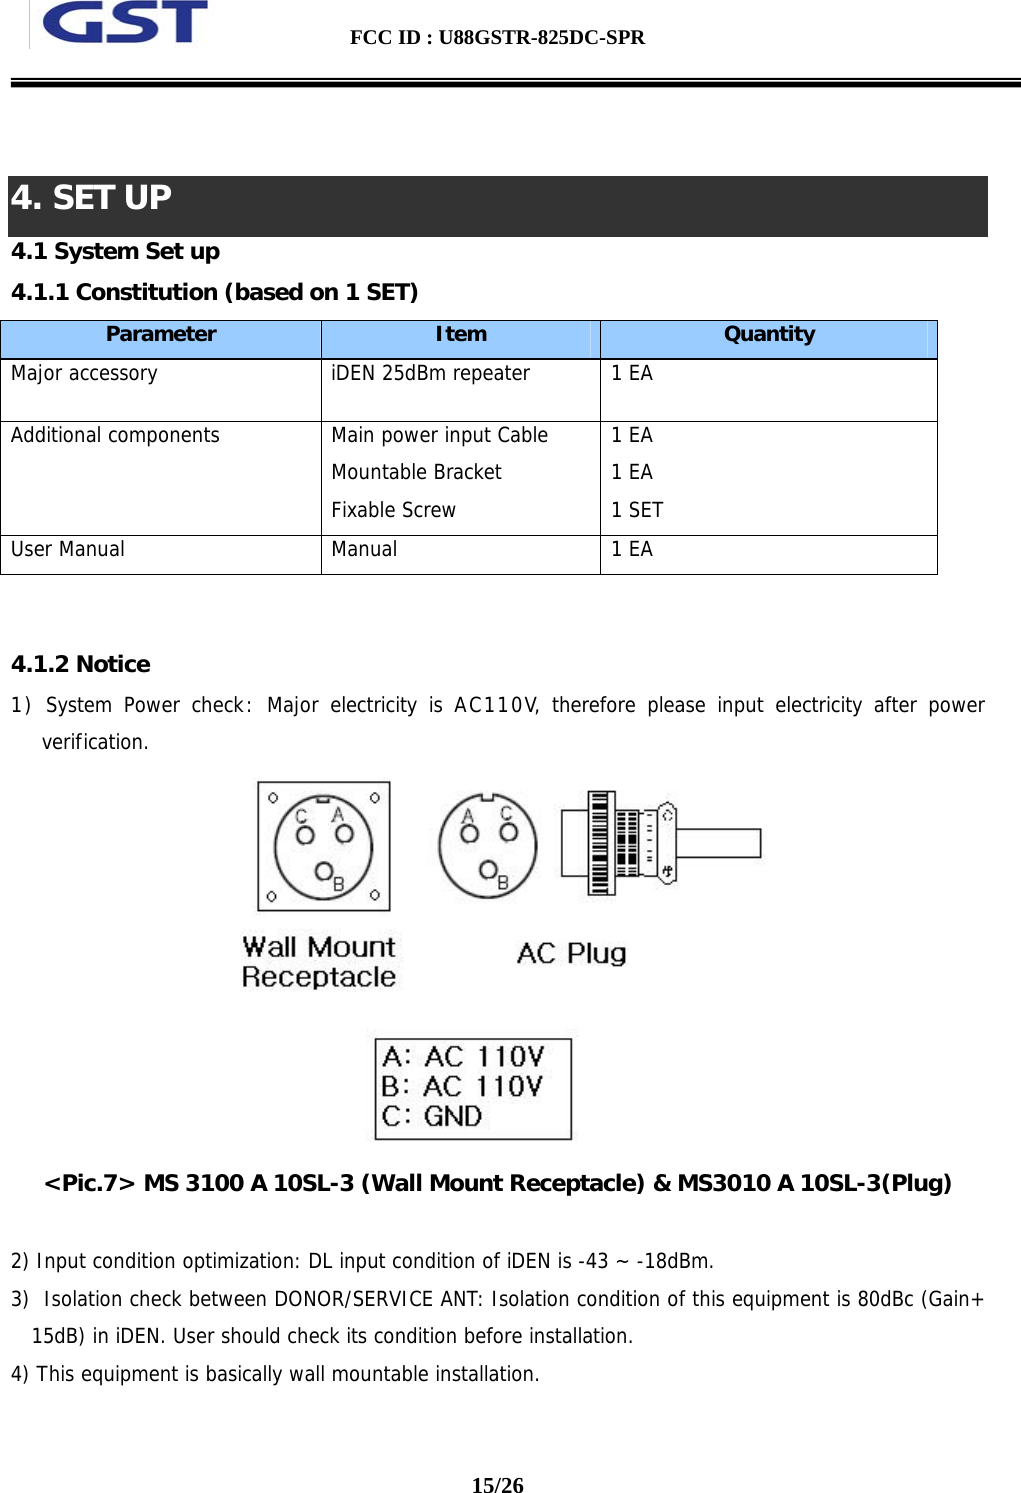  FCC ID : U88GSTR-825DC-SPR                                                                                          15/26    4. SET UP 4.1 System Set up  4.1.1 Constitution (based on 1 SET) Parameter  Item  Quantity Major accessory   iDEN 25dBm repeater  1 EA Additional components  Main power input Cable Mountable Bracket Fixable Screw 1 EA 1 EA 1 SET User Manual  Manual  1 EA   4.1.2 Notice 1) System Power check: Major electricity is AC110V, therefore please input electricity after power verification.   &lt;Pic.7&gt; MS 3100 A 10SL-3 (Wall Mount Receptacle) &amp; MS3010 A 10SL-3(Plug)  2) Input condition optimization: DL input condition of iDEN is -43 ~ -18dBm. 3)  Isolation check between DONOR/SERVICE ANT: Isolation condition of this equipment is 80dBc (Gain+15dB) in iDEN. User should check its condition before installation. 4) This equipment is basically wall mountable installation.  